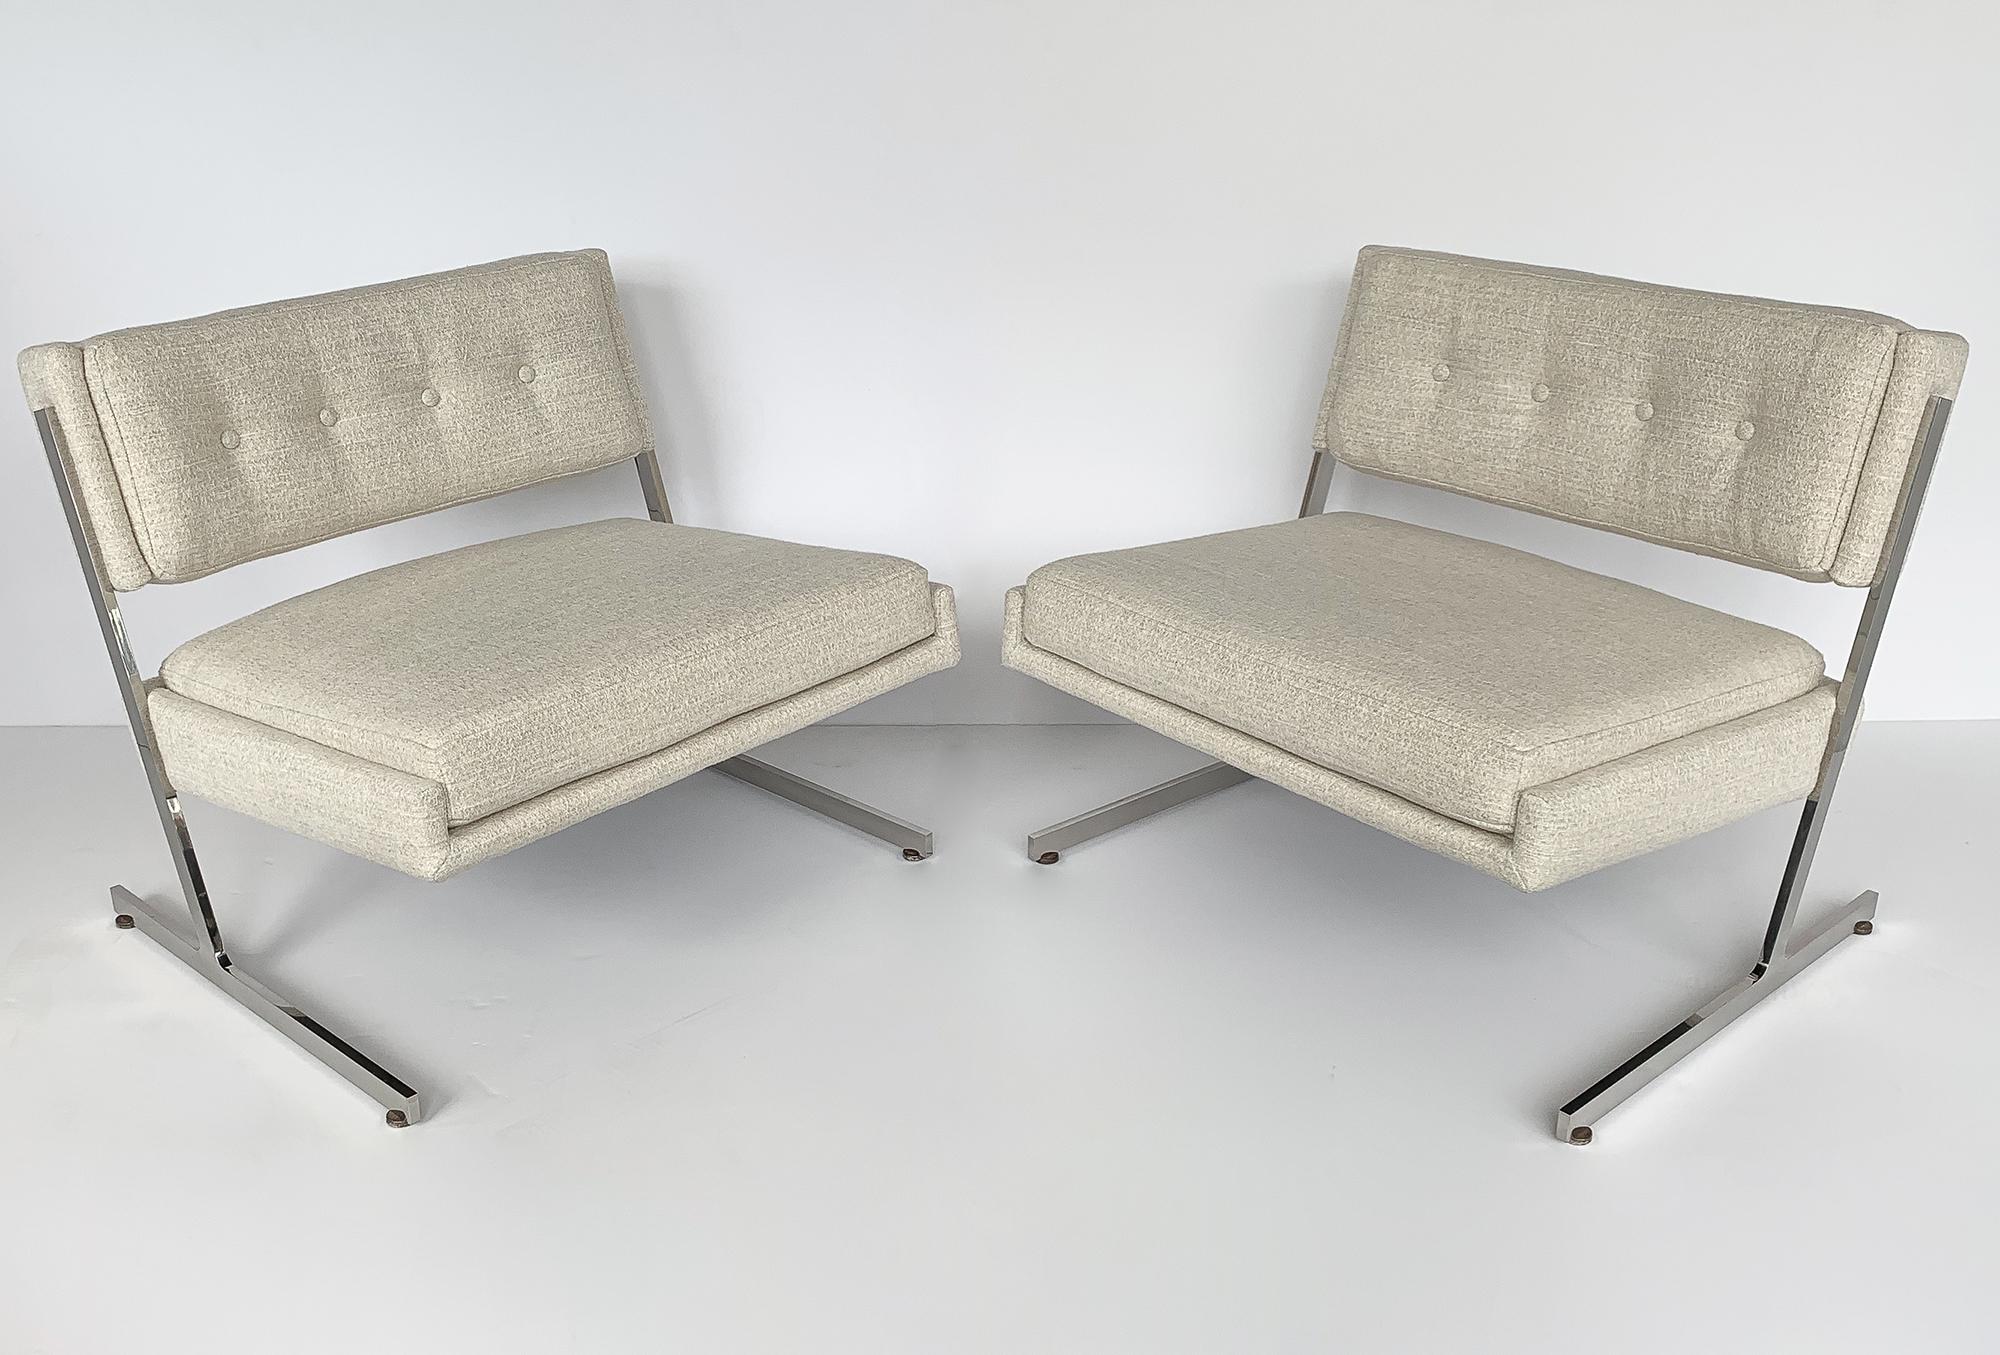 Pair of Harvey Probber cantilevered armless slipper lounge chairs, circa 1960s. Newly upholstered in a sophisticated textured woven off white fabric. New foam throughout. Semi-attached seat cushion and back rest with button detail. Polished steel